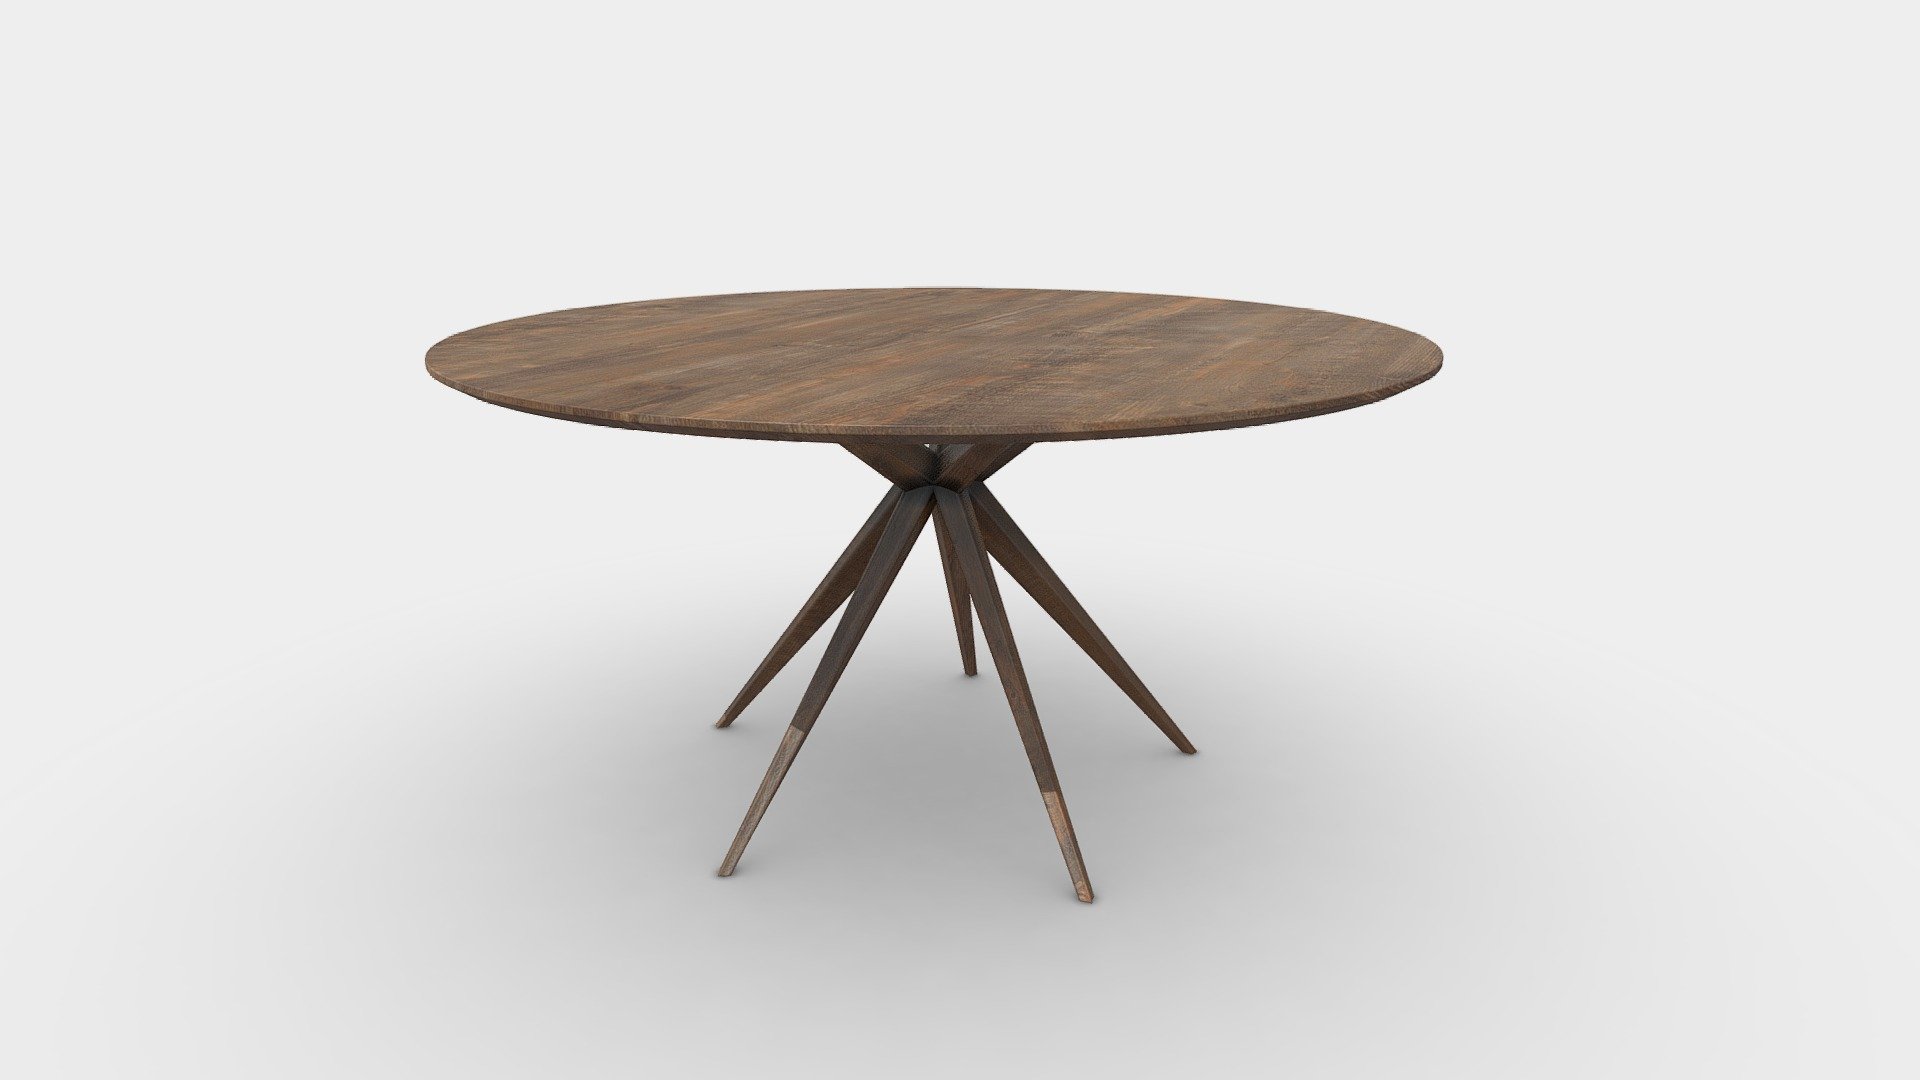 3D model of Hunter Round Dining Table.
Textures included: Unreal Engine, PBR, Corona, Vray, GLFT
3D model: FBX - Farmhouse Hunter Round Dining Table - Buy Royalty Free 3D model by architexture 3d model